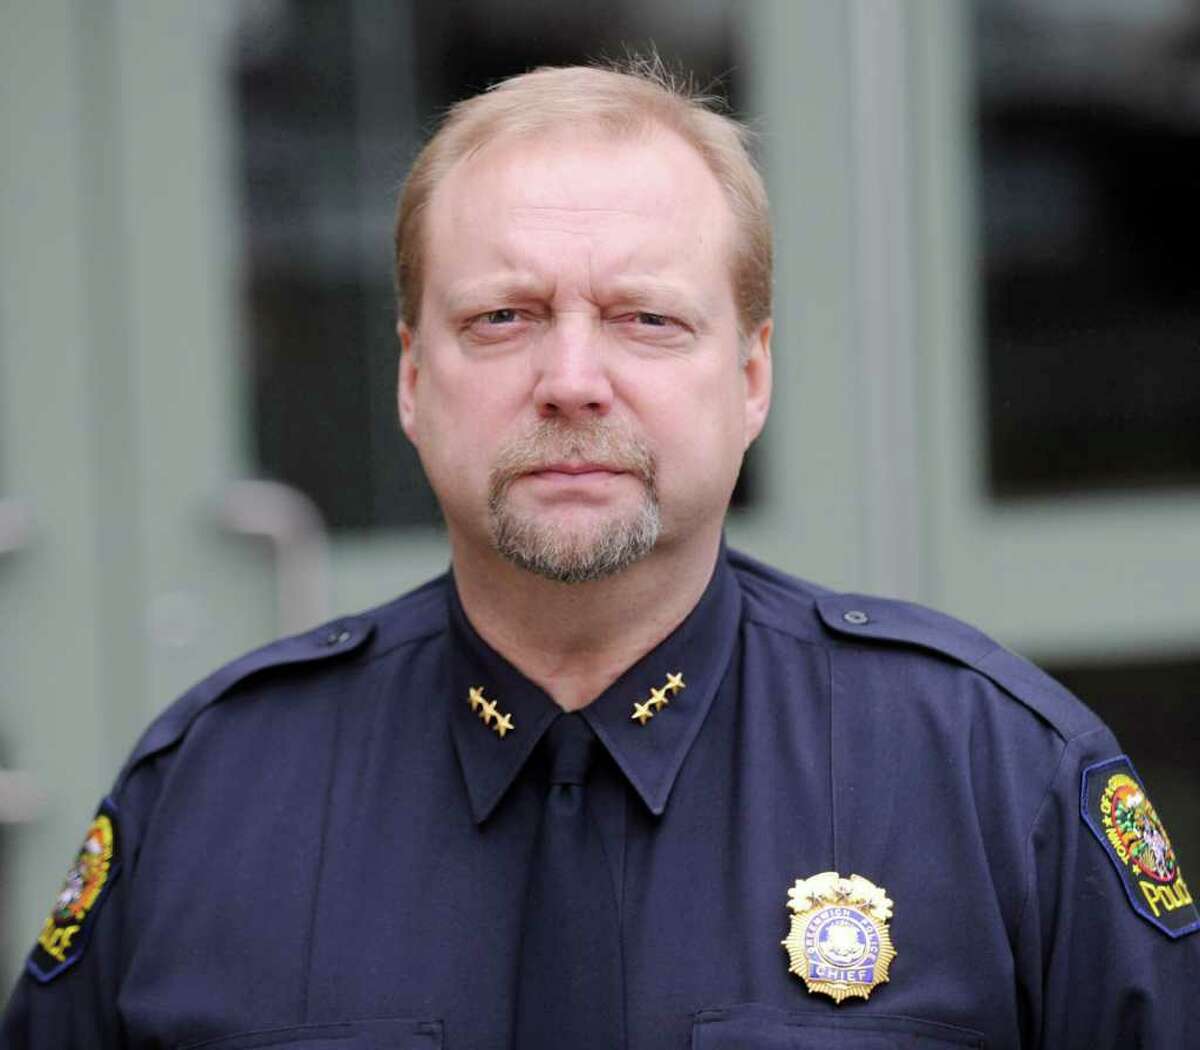 Retired Greenwich Police Chief David Ridberg made $240,097.59 in 2011, making him the top municipal wage earner last year.